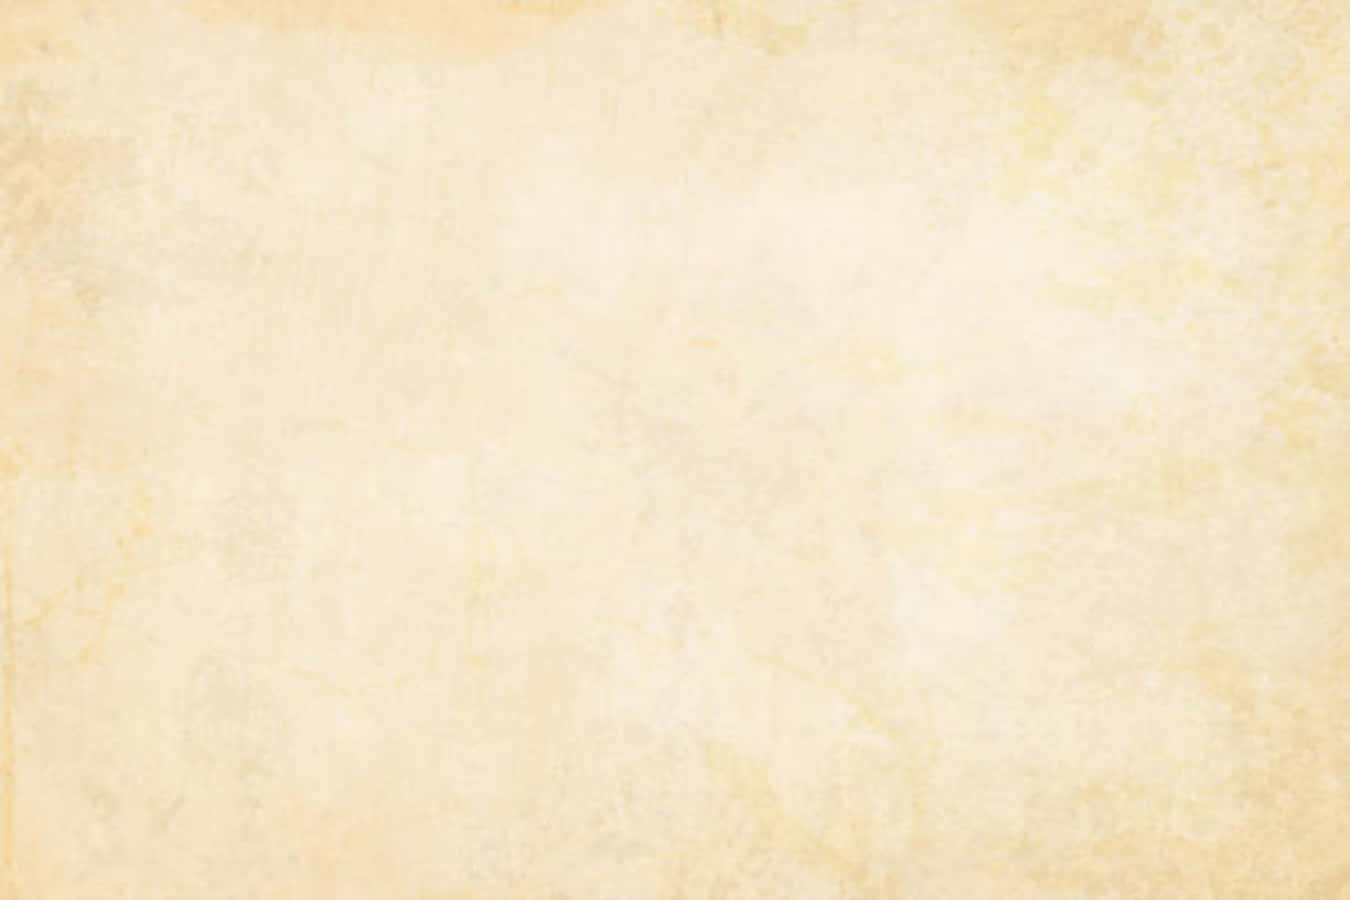 A Beige Paper Background With A White Border